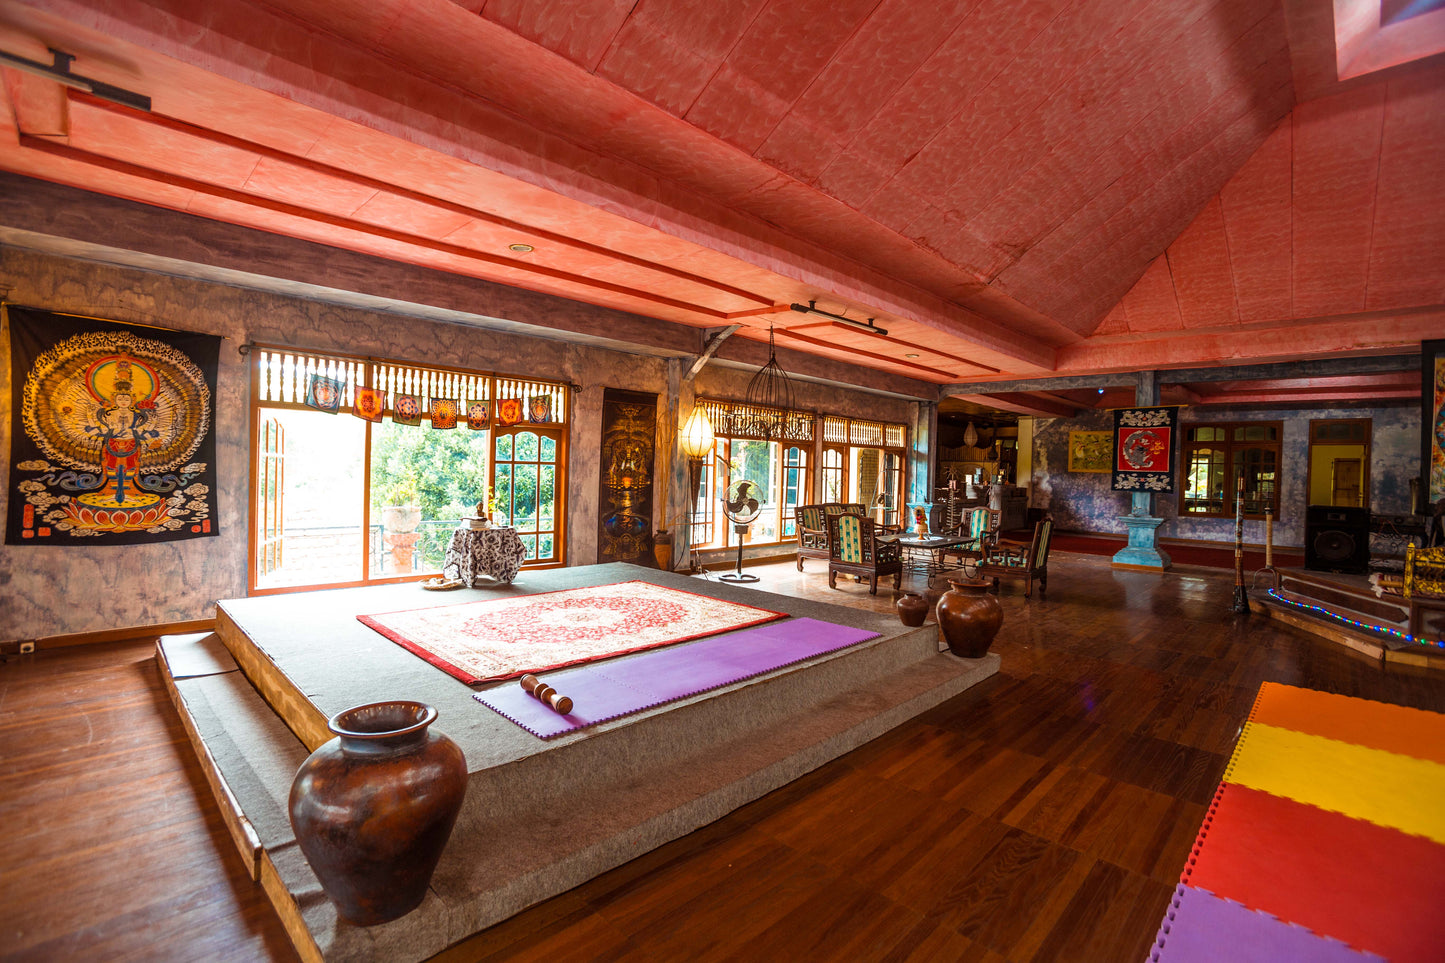 Single bed in Large shared 3 bed room - 1 Person - 1 week - Bali Flow Temple - Living room with Daily Classes